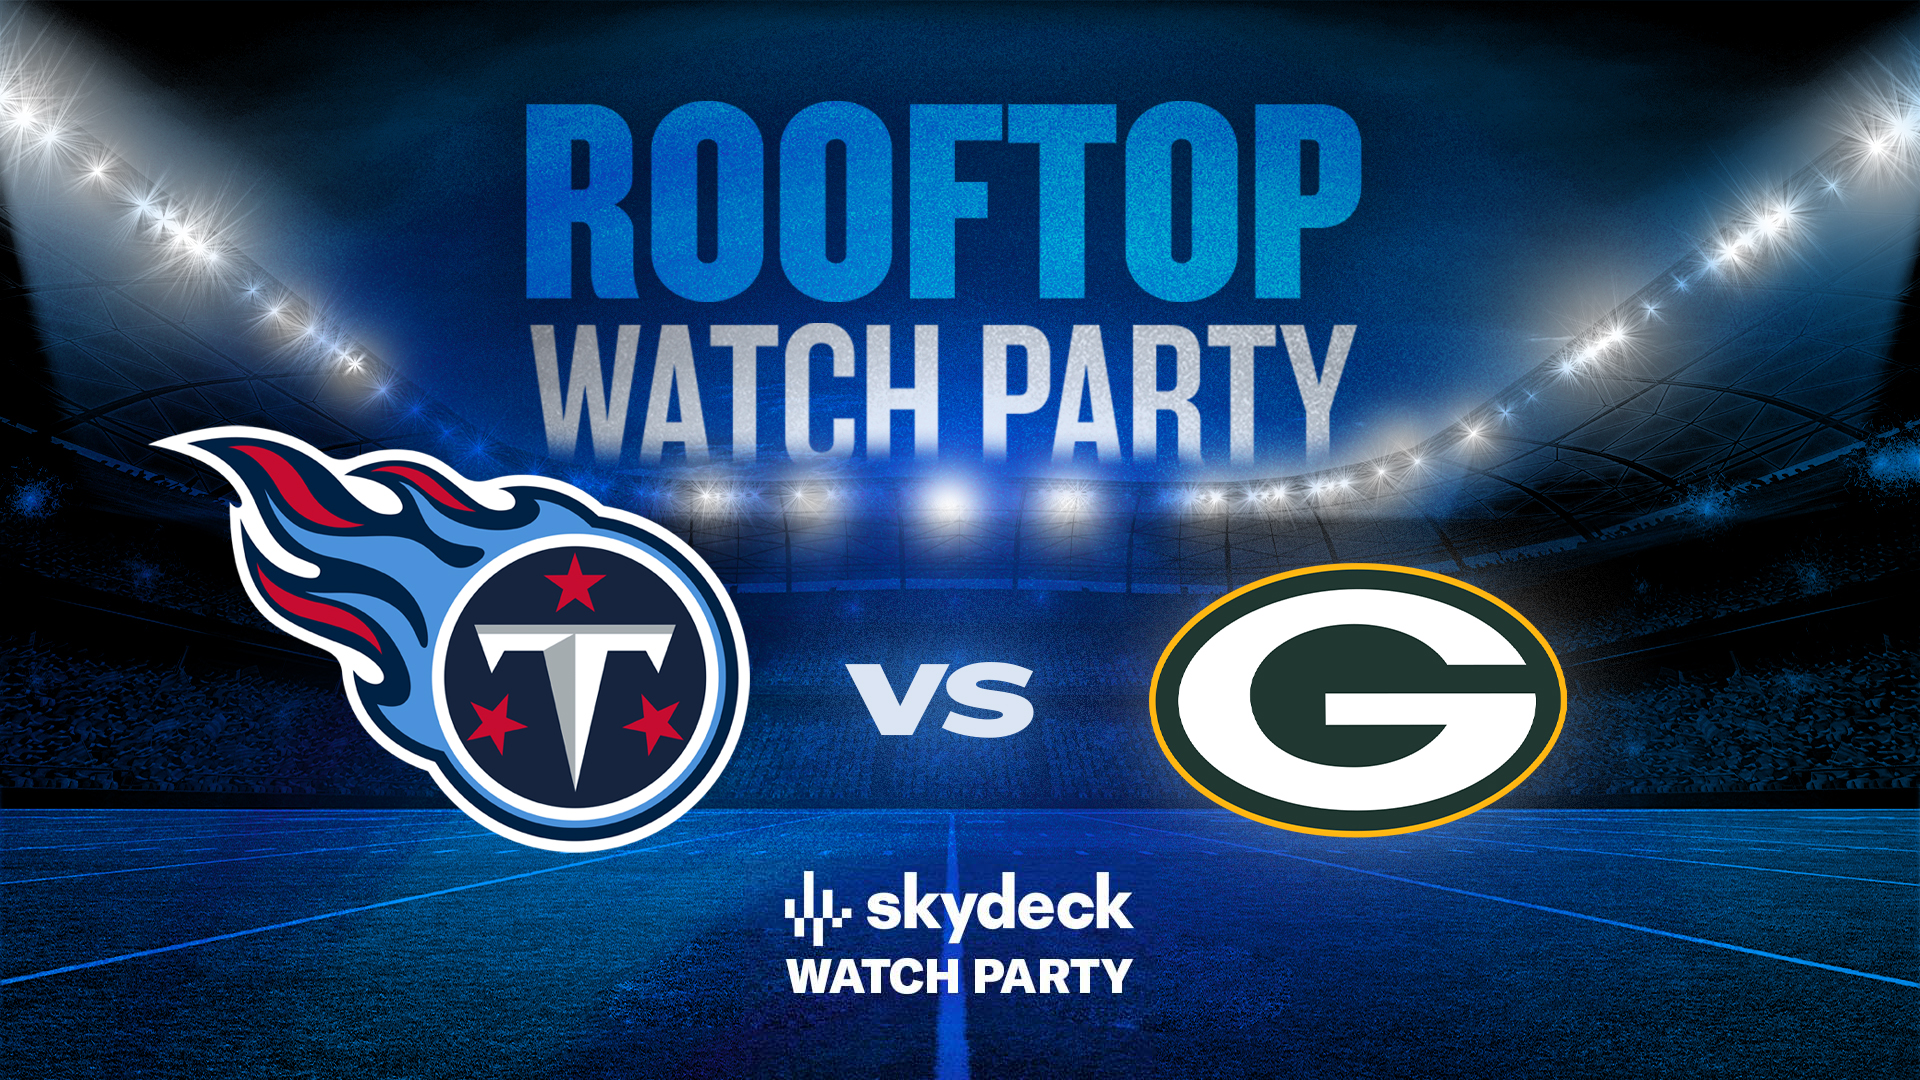 Promo image of Titans vs. Packers | Skydeck Watch Party